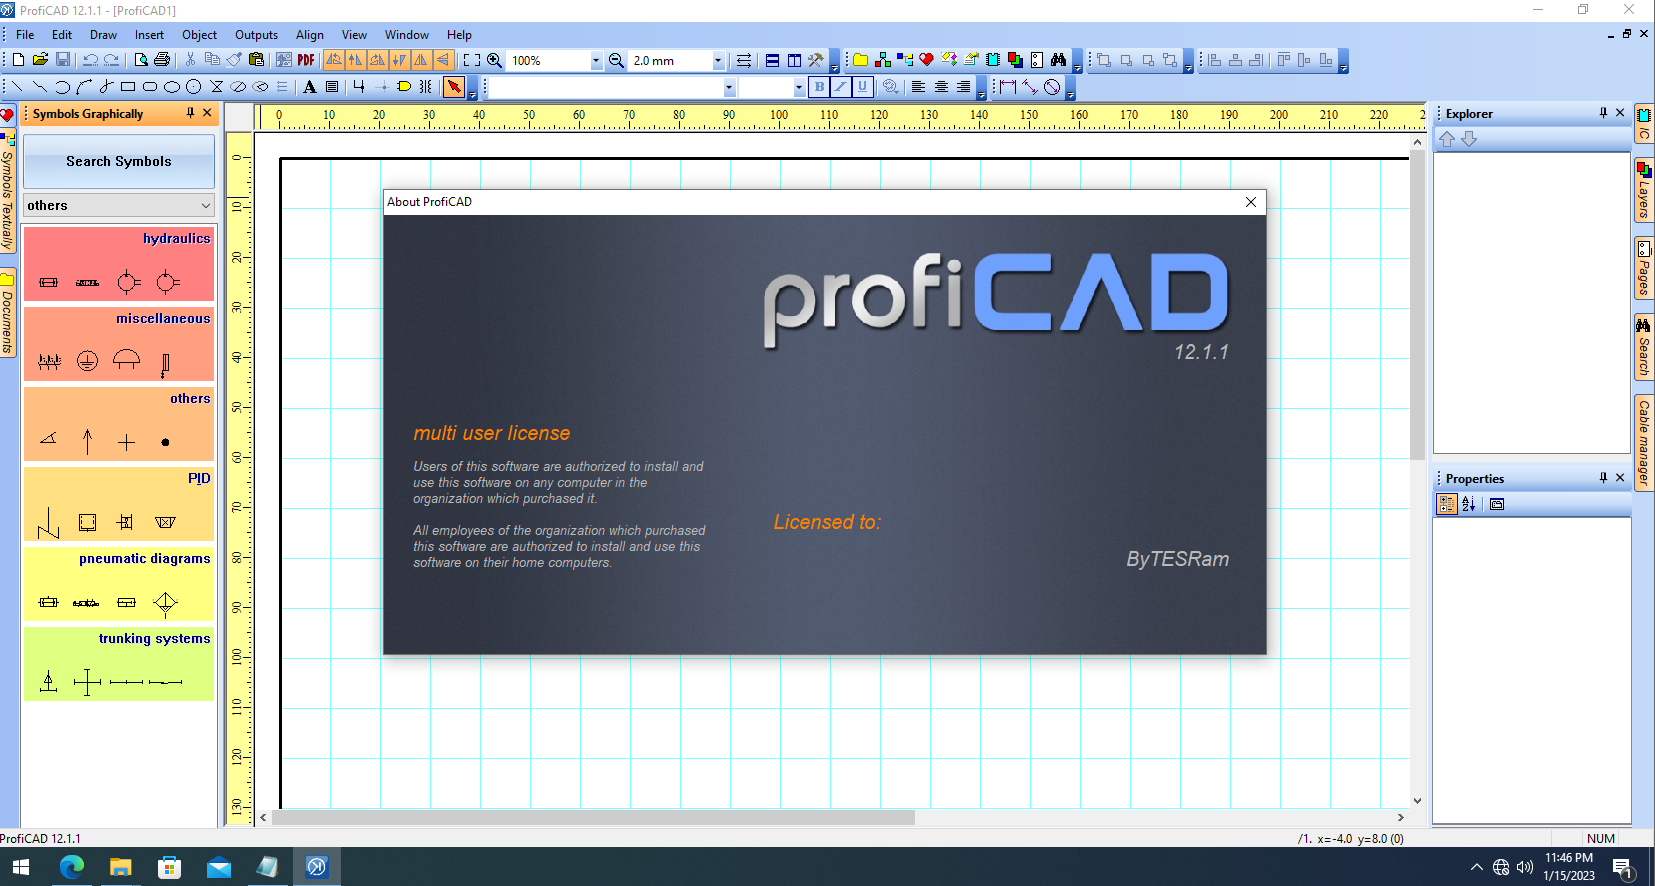 Working with ProfiCAD 12.1.1 full license